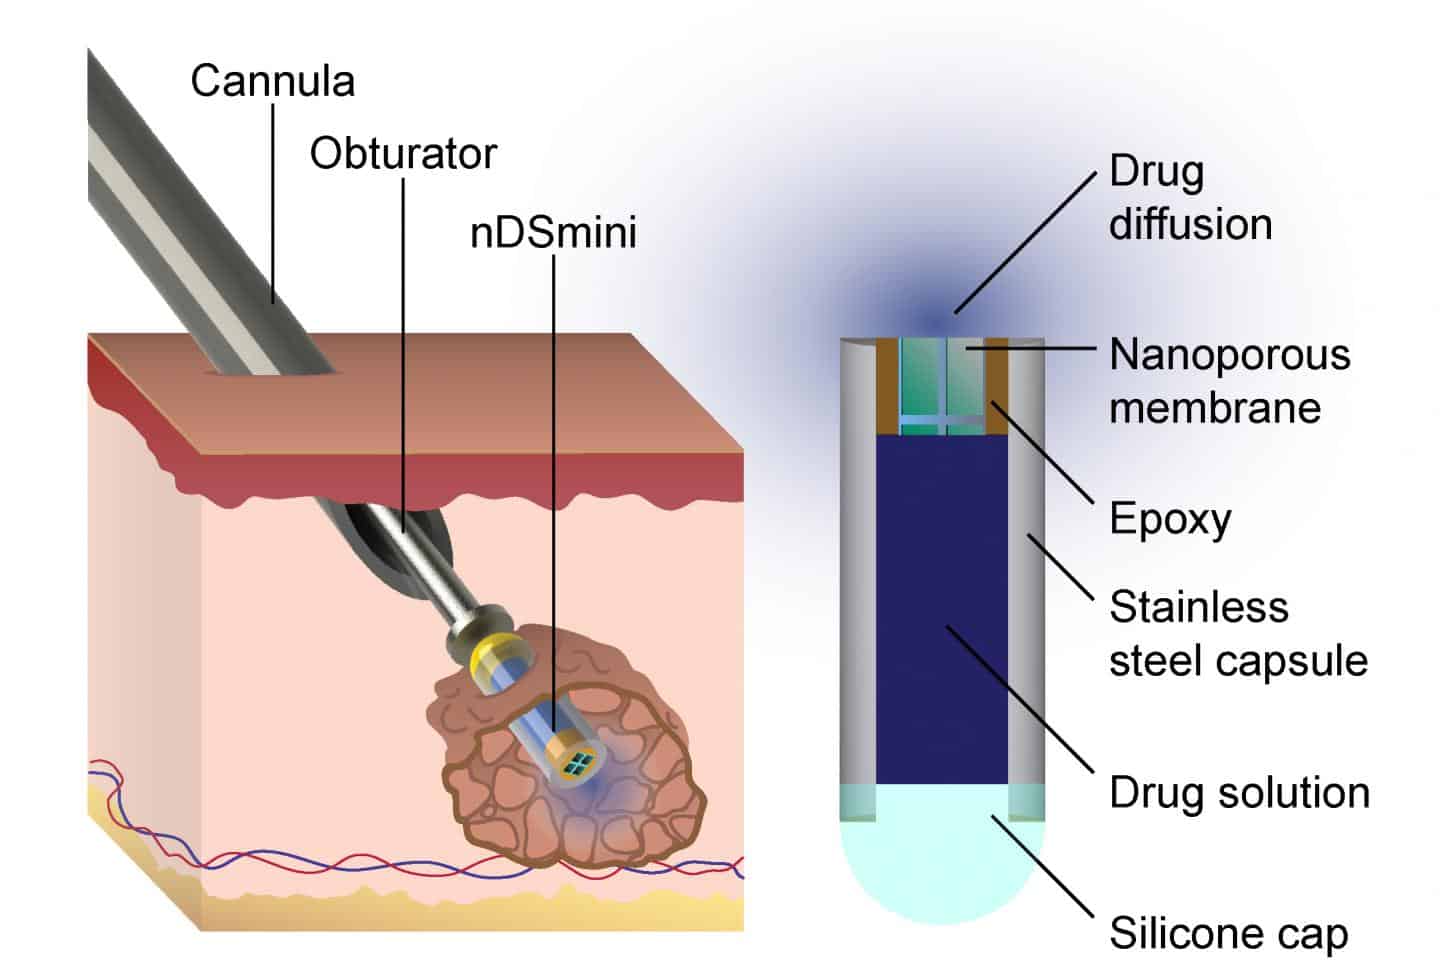 The nDSmini nanofluidic device, shown in section and being implanted.